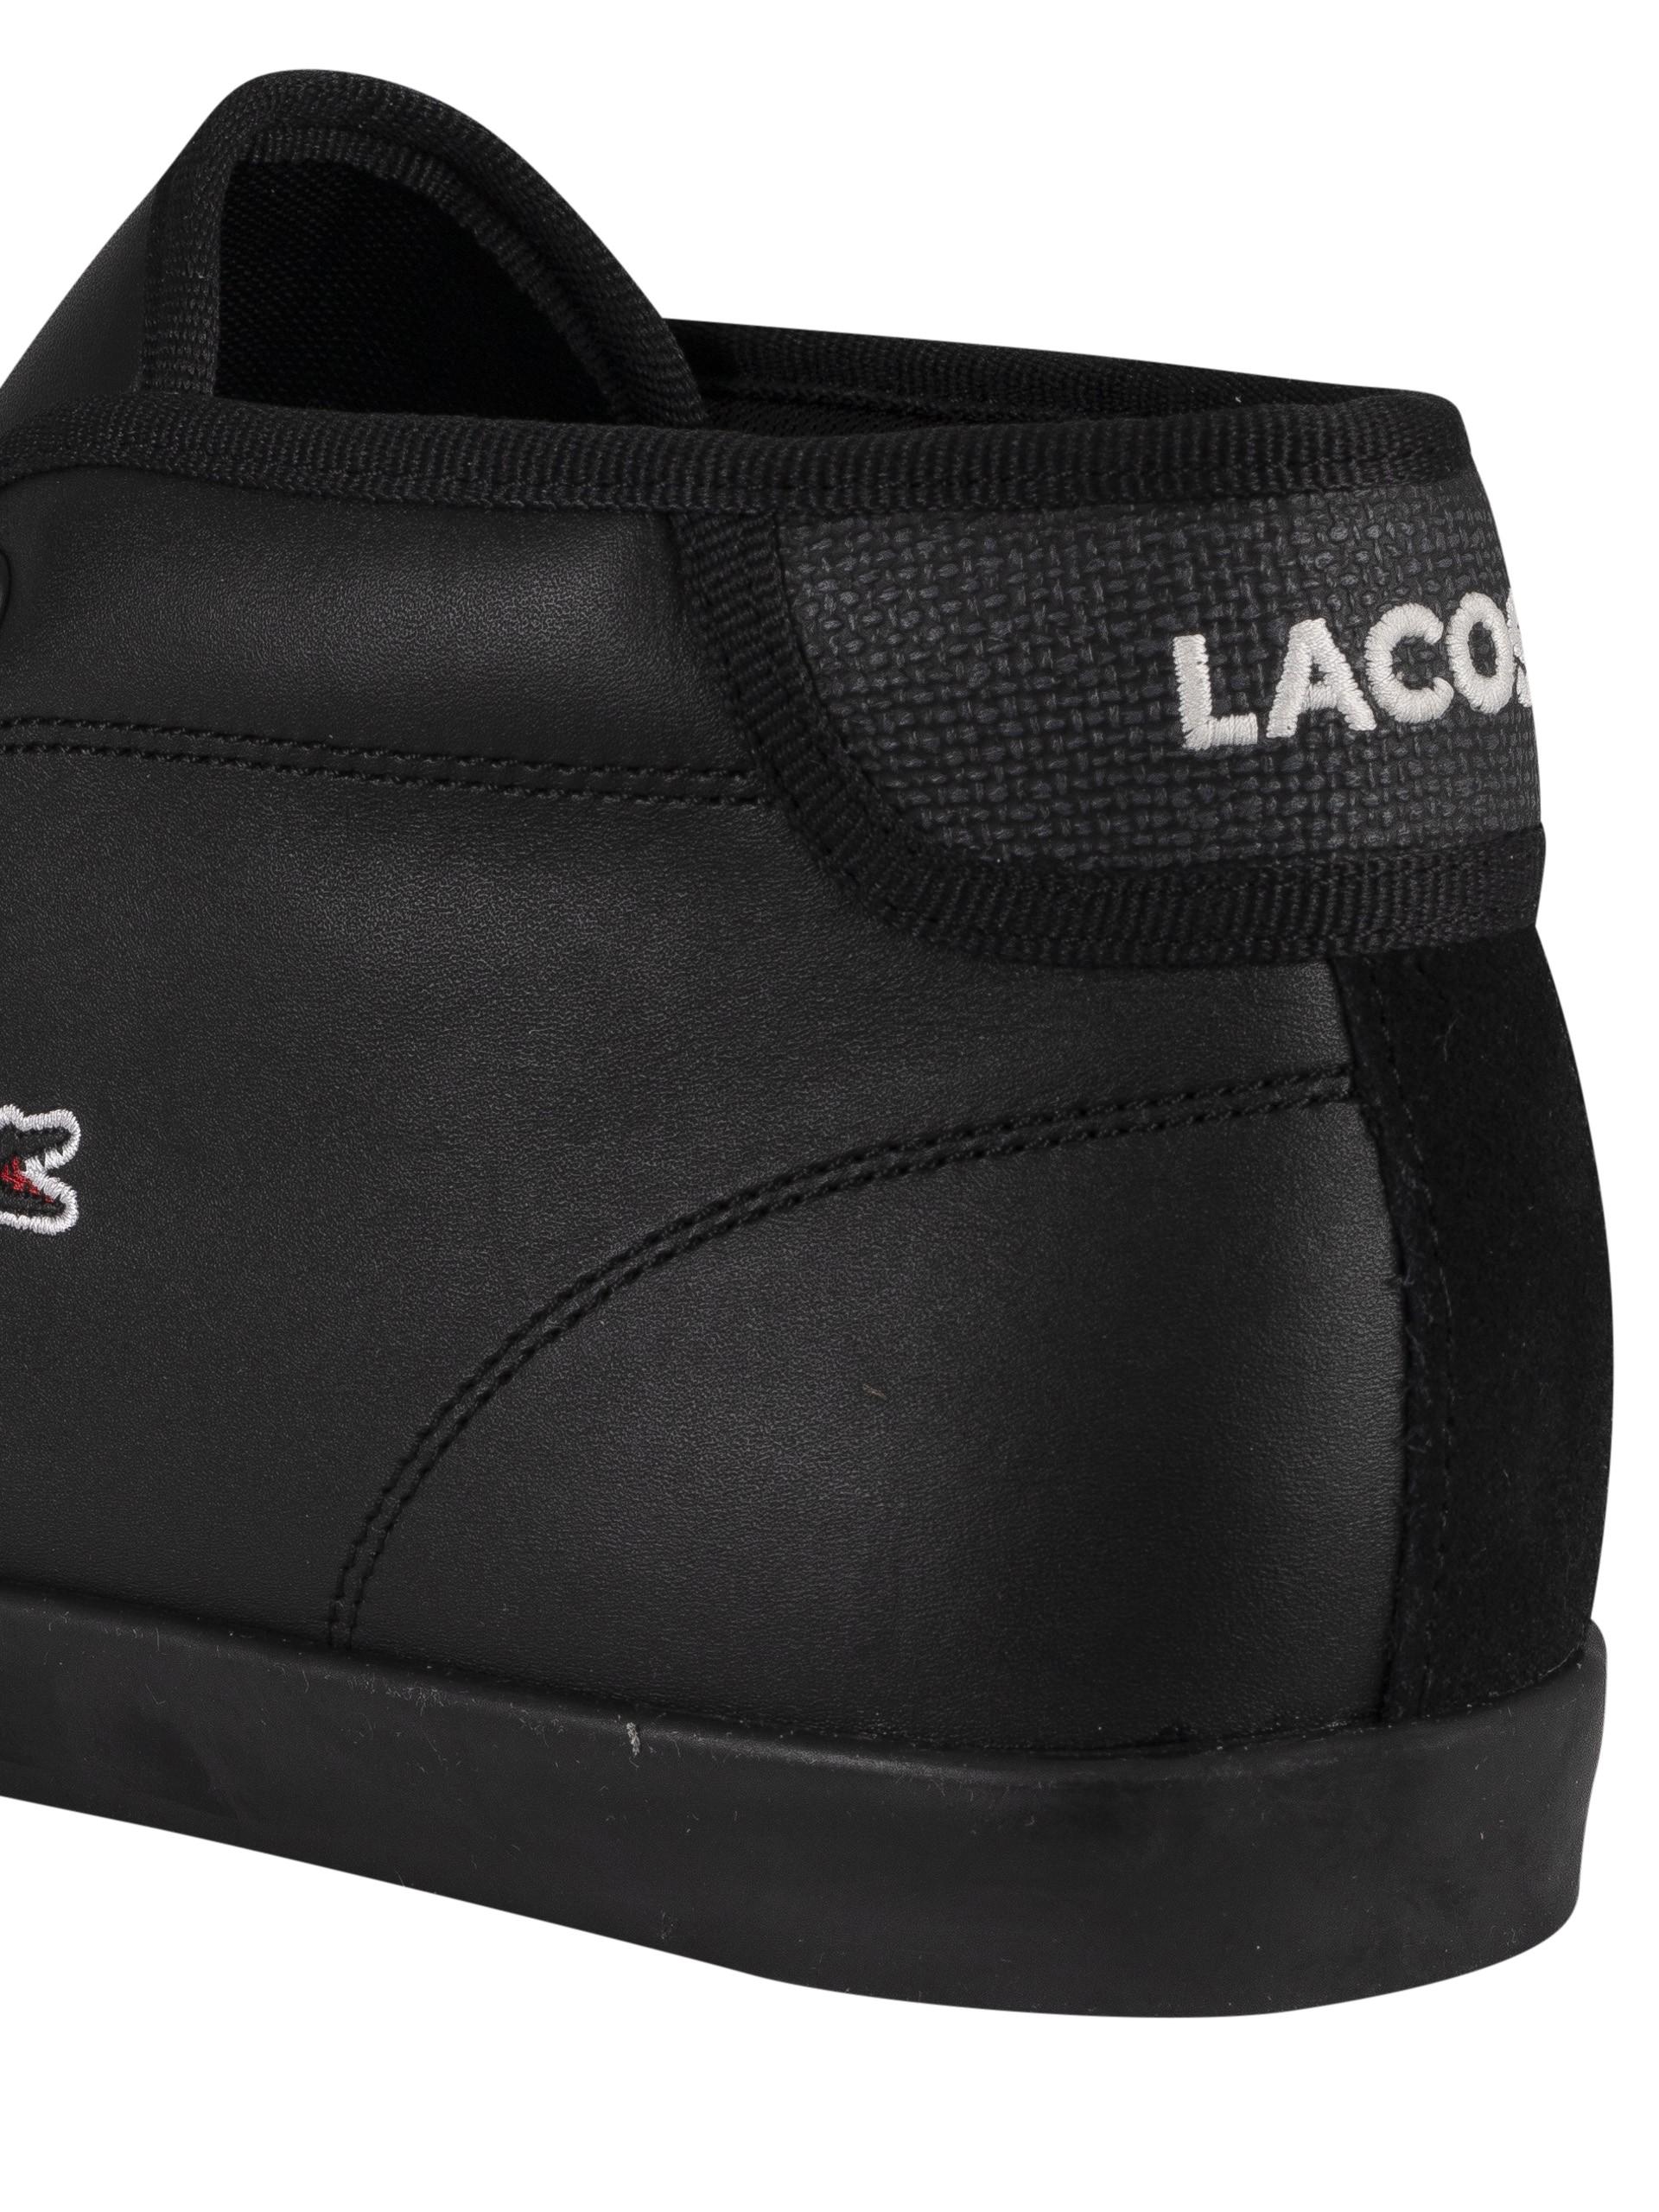 lacoste ampthill black leather - 64 